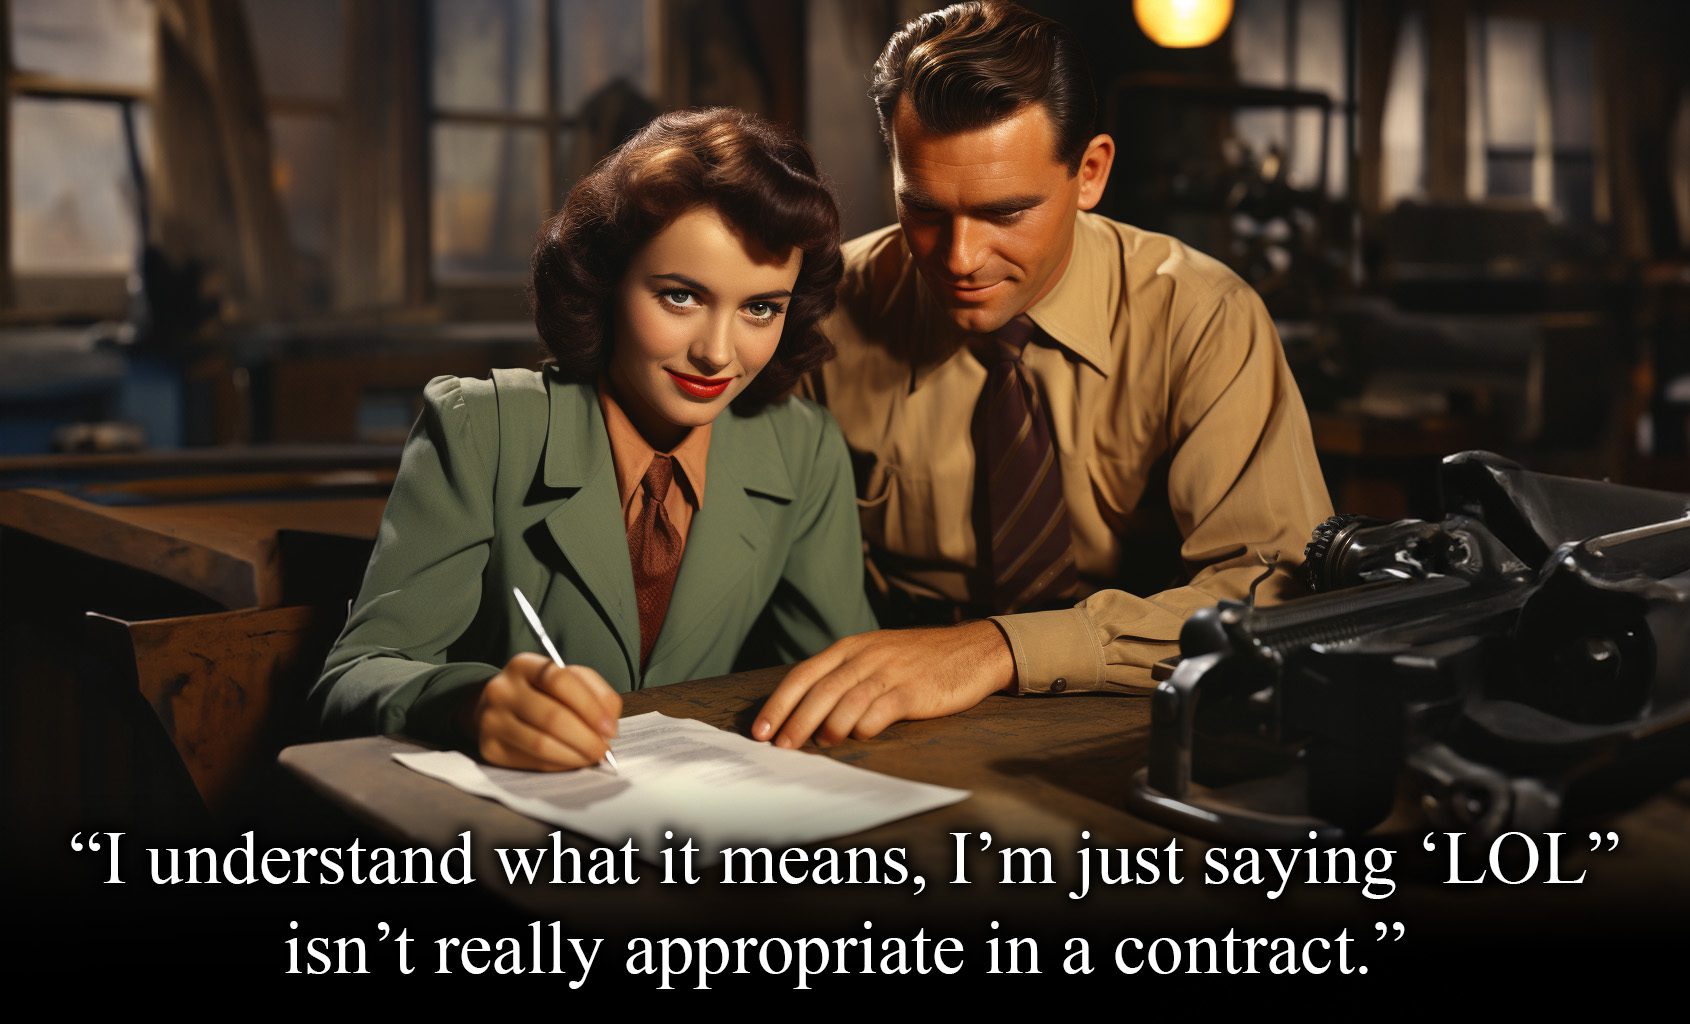 Vintage image of a couple signing a contract